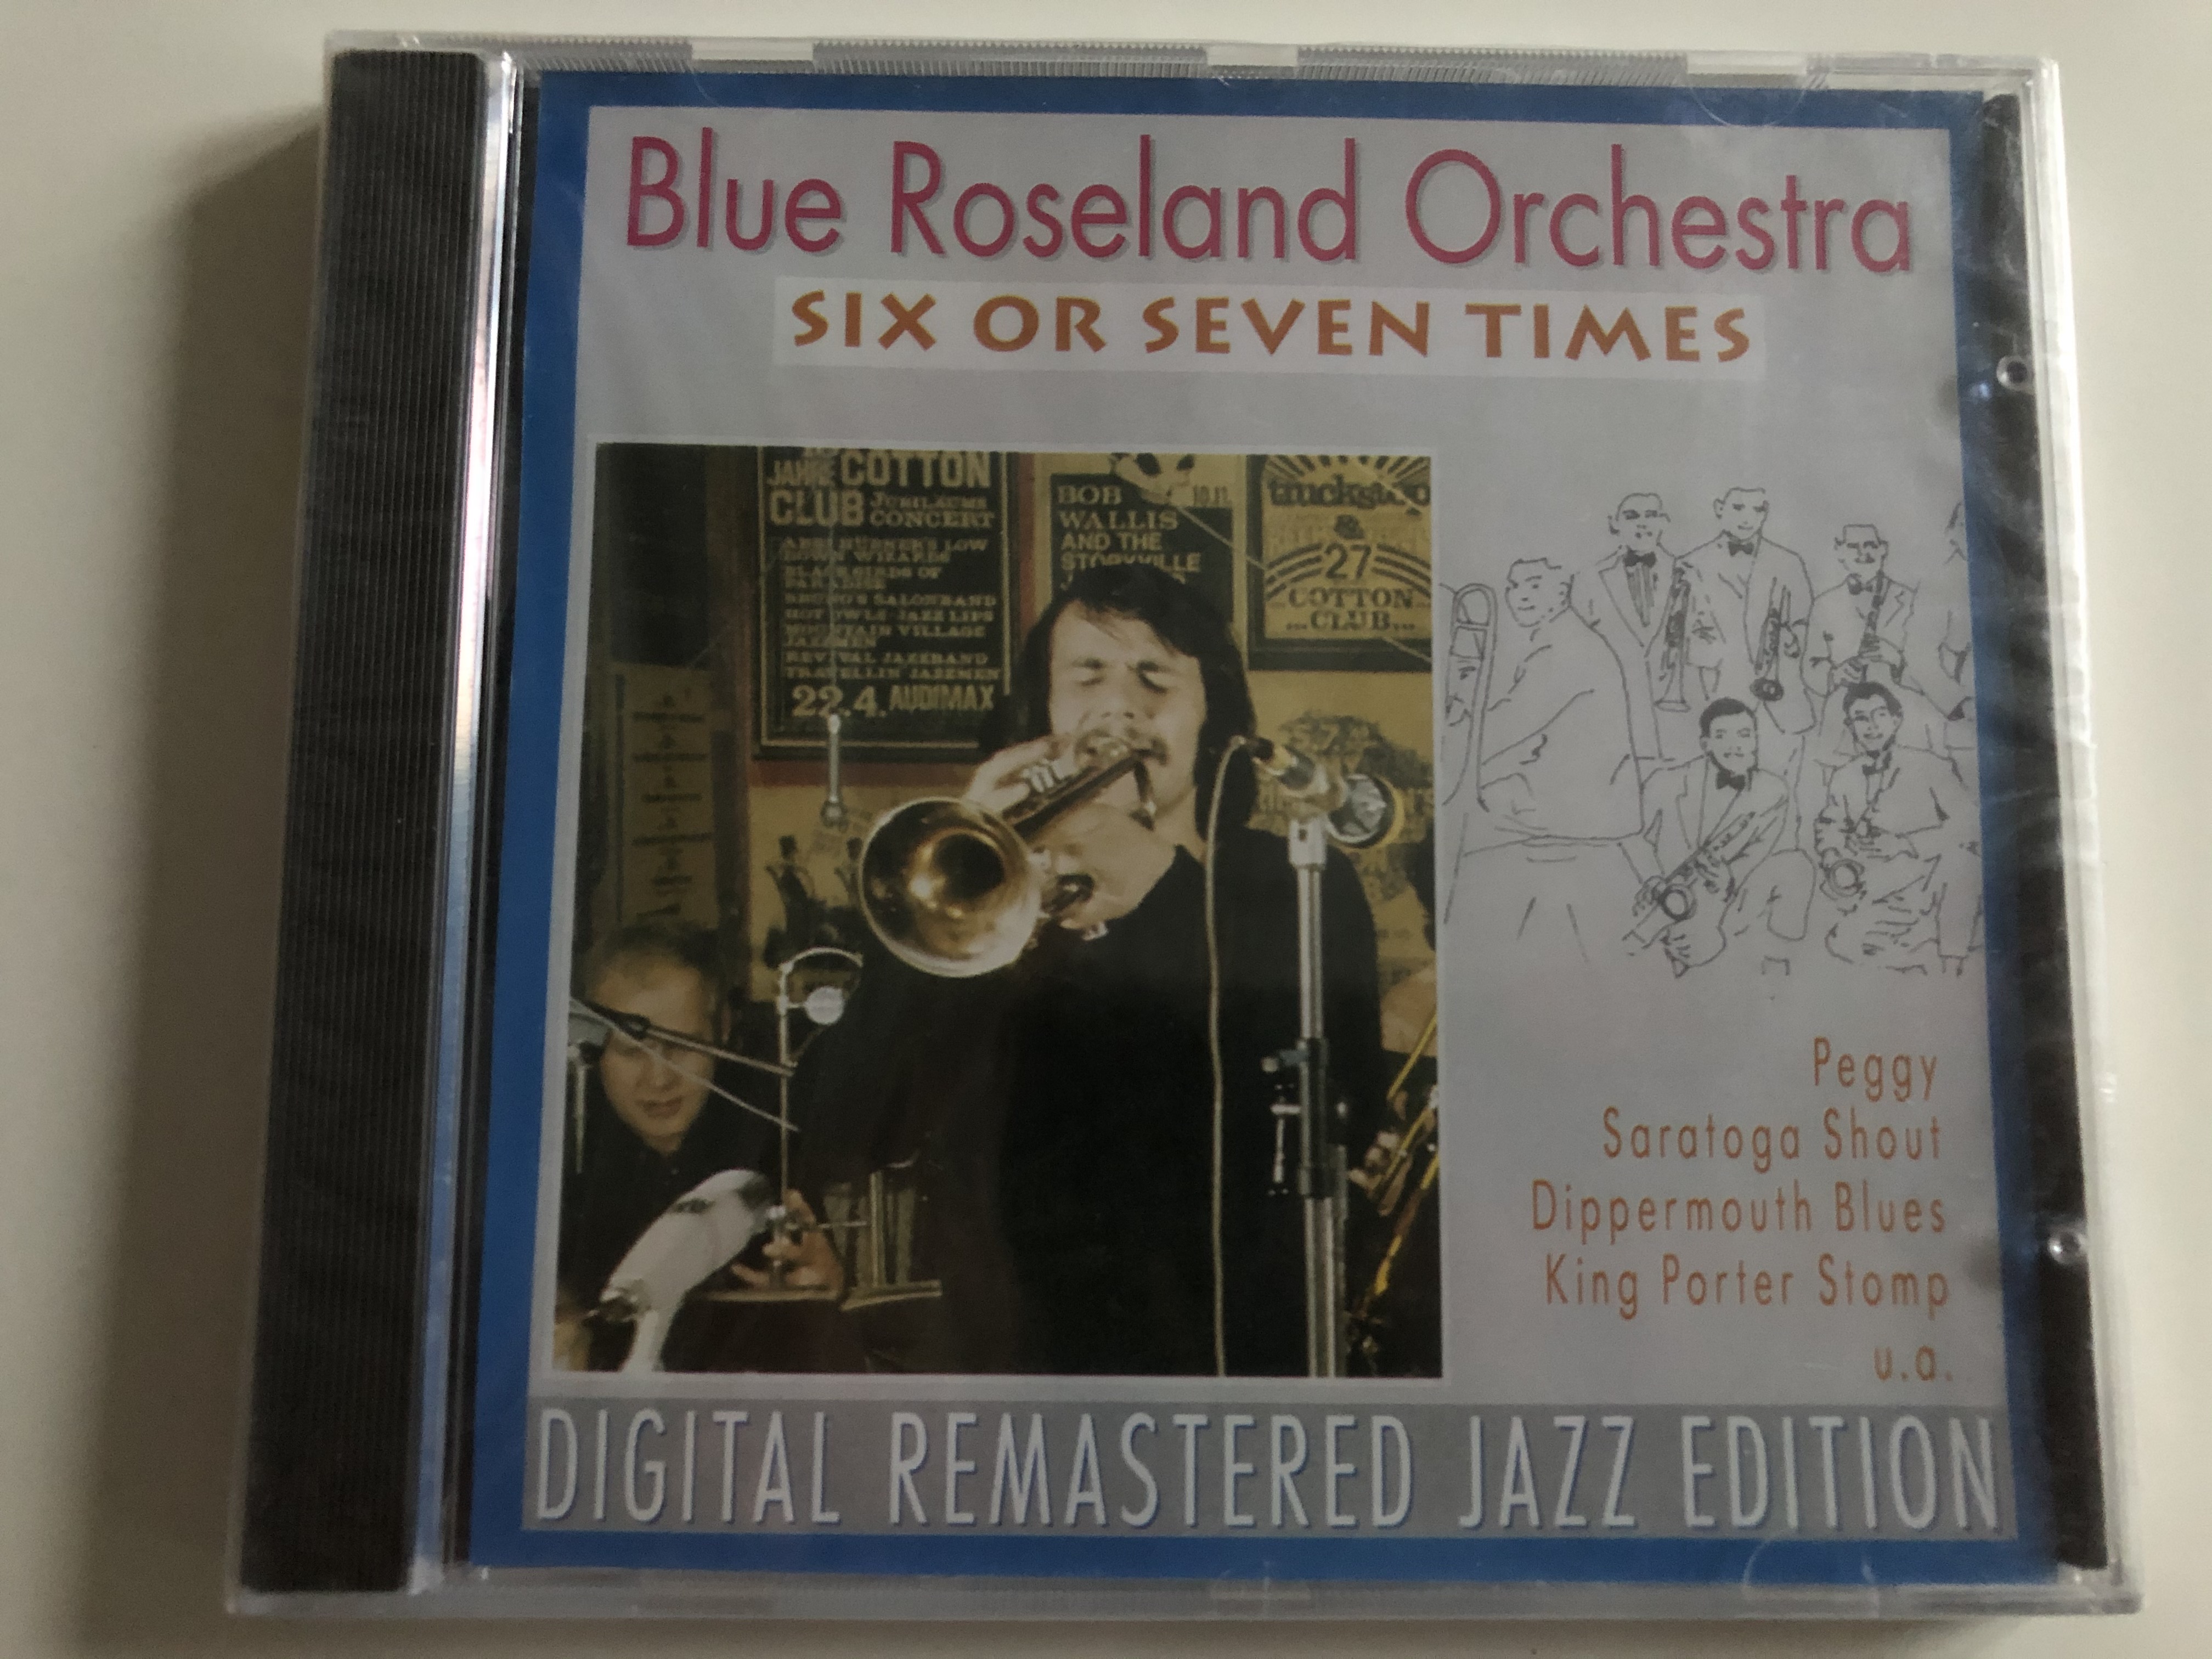 blue-roseland-orchestra-six-or-seven-times-peggy-saratoga-shout-dippermouth-blues-king-porter-stomp-digital-remastered-jazz-edition-pastels-audio-cd-1995-cd-20-1-.jpg